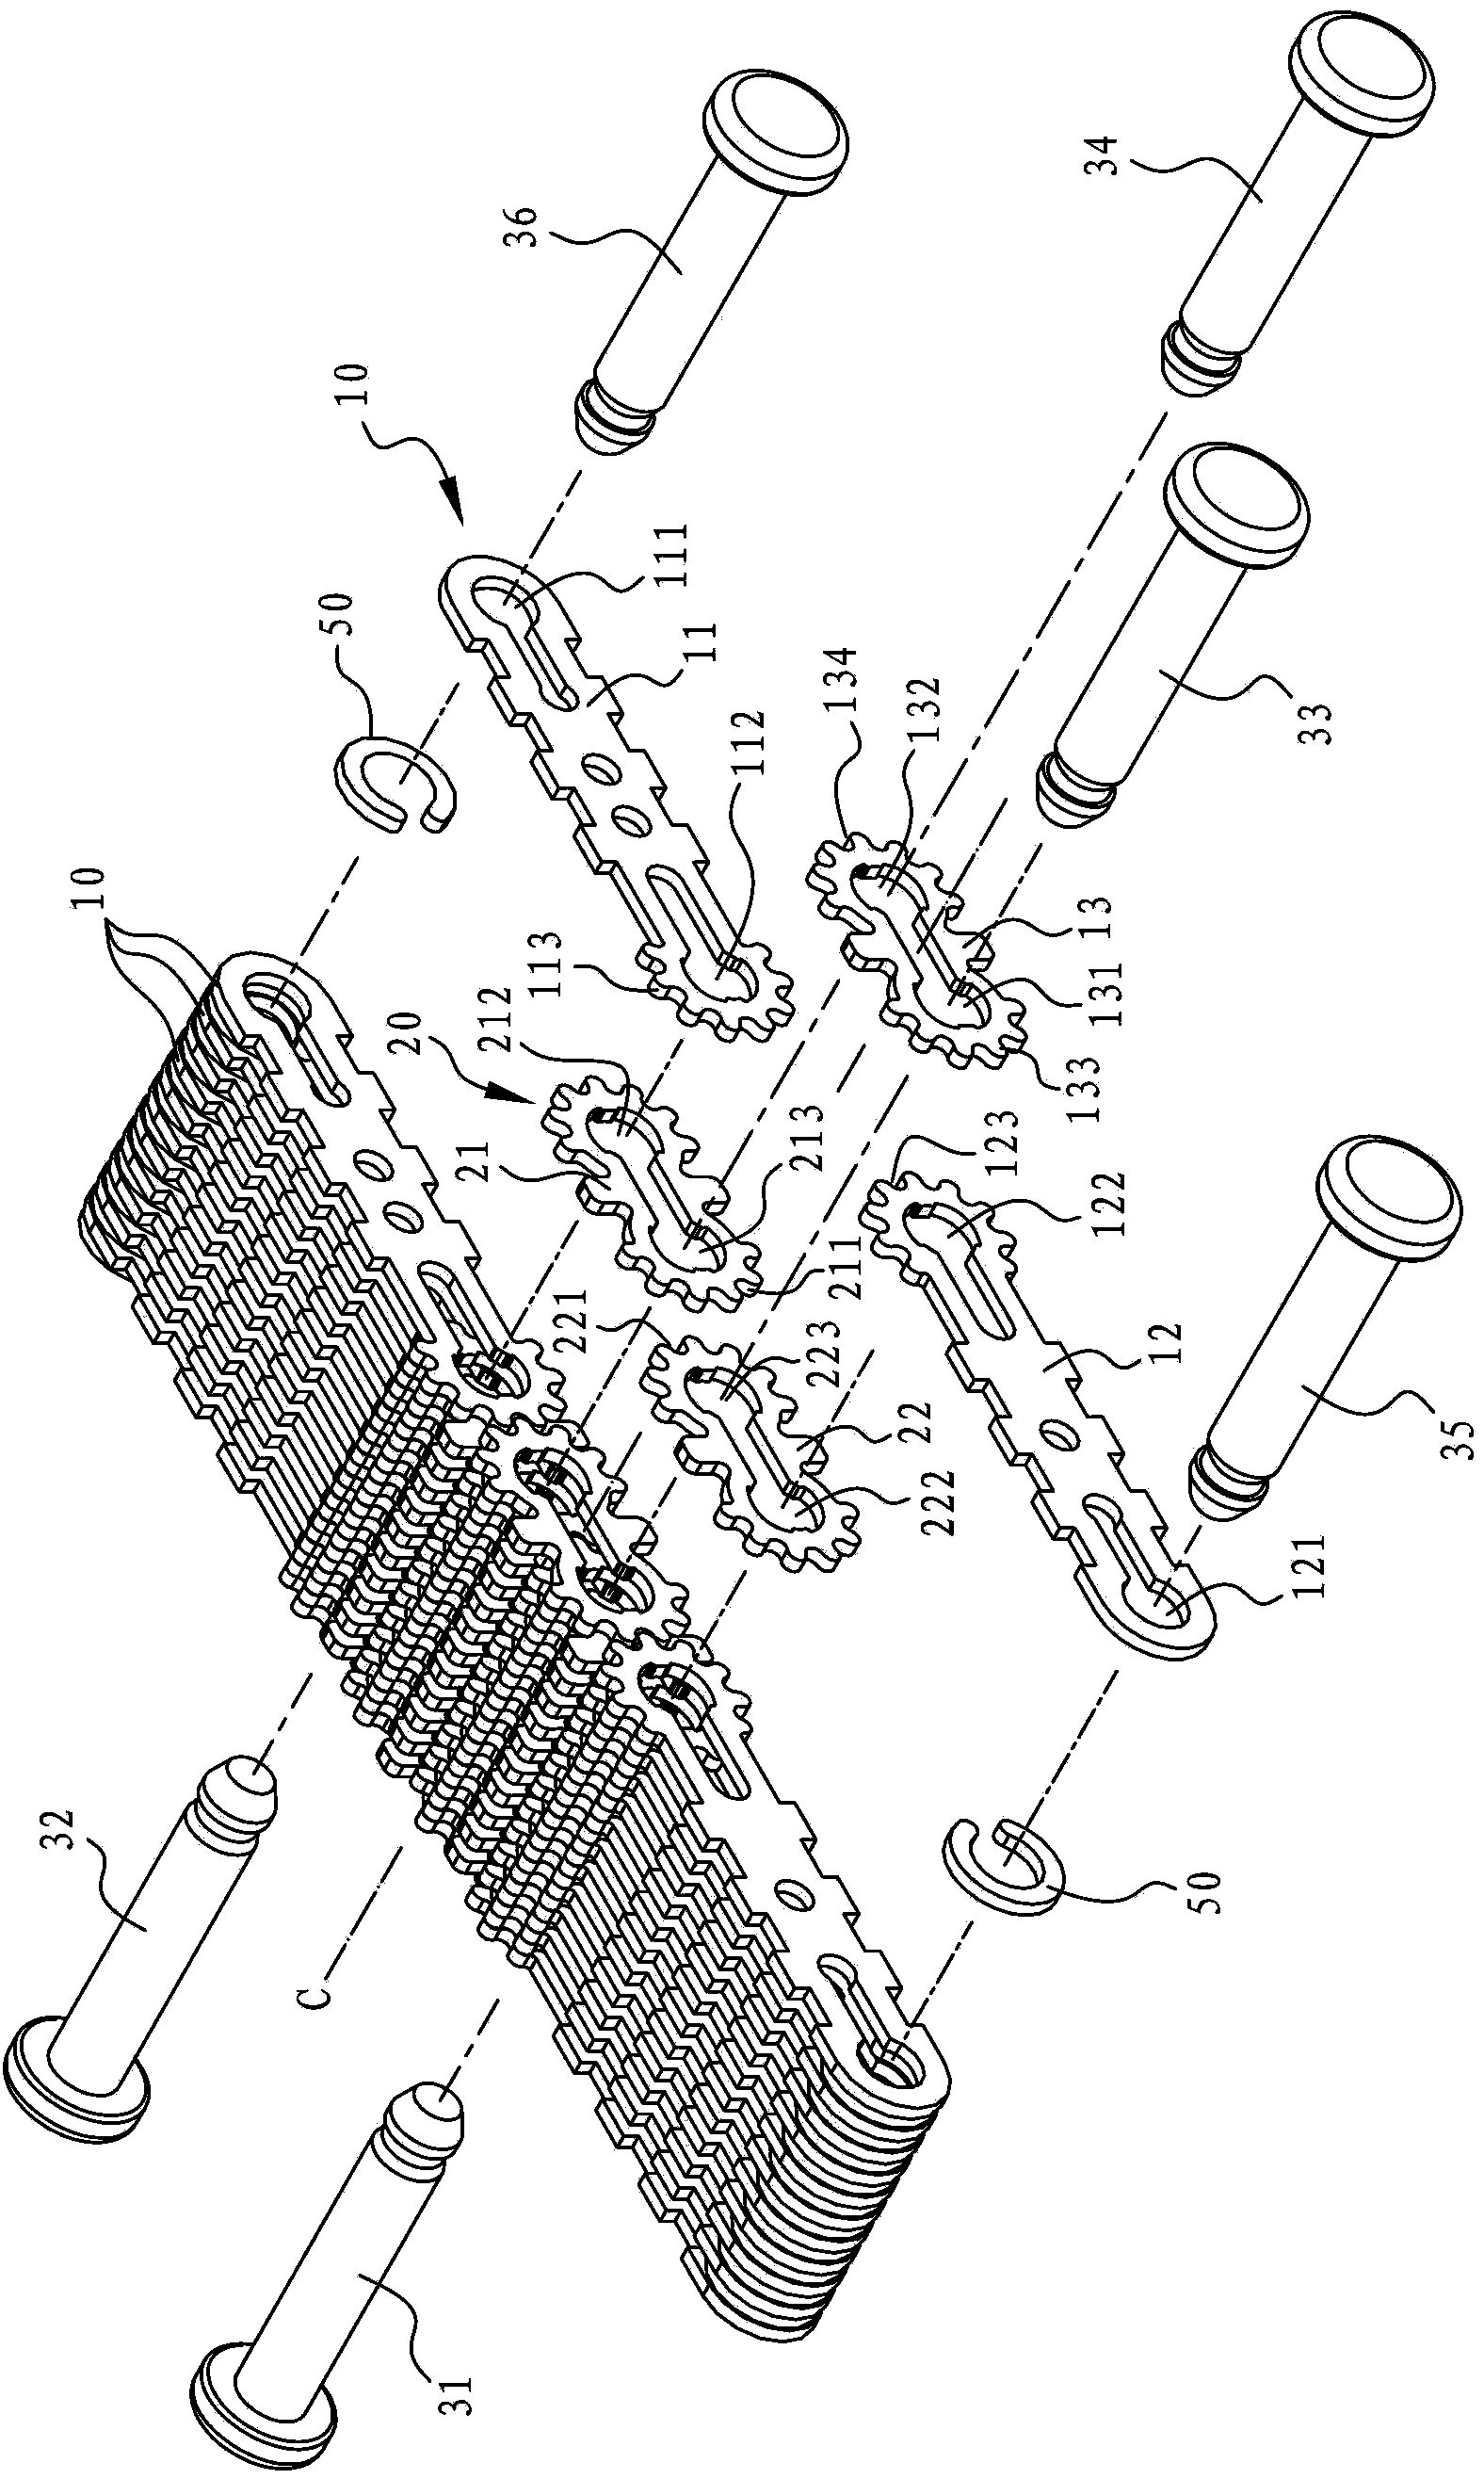 Synchronous unfolding and folding apparatus